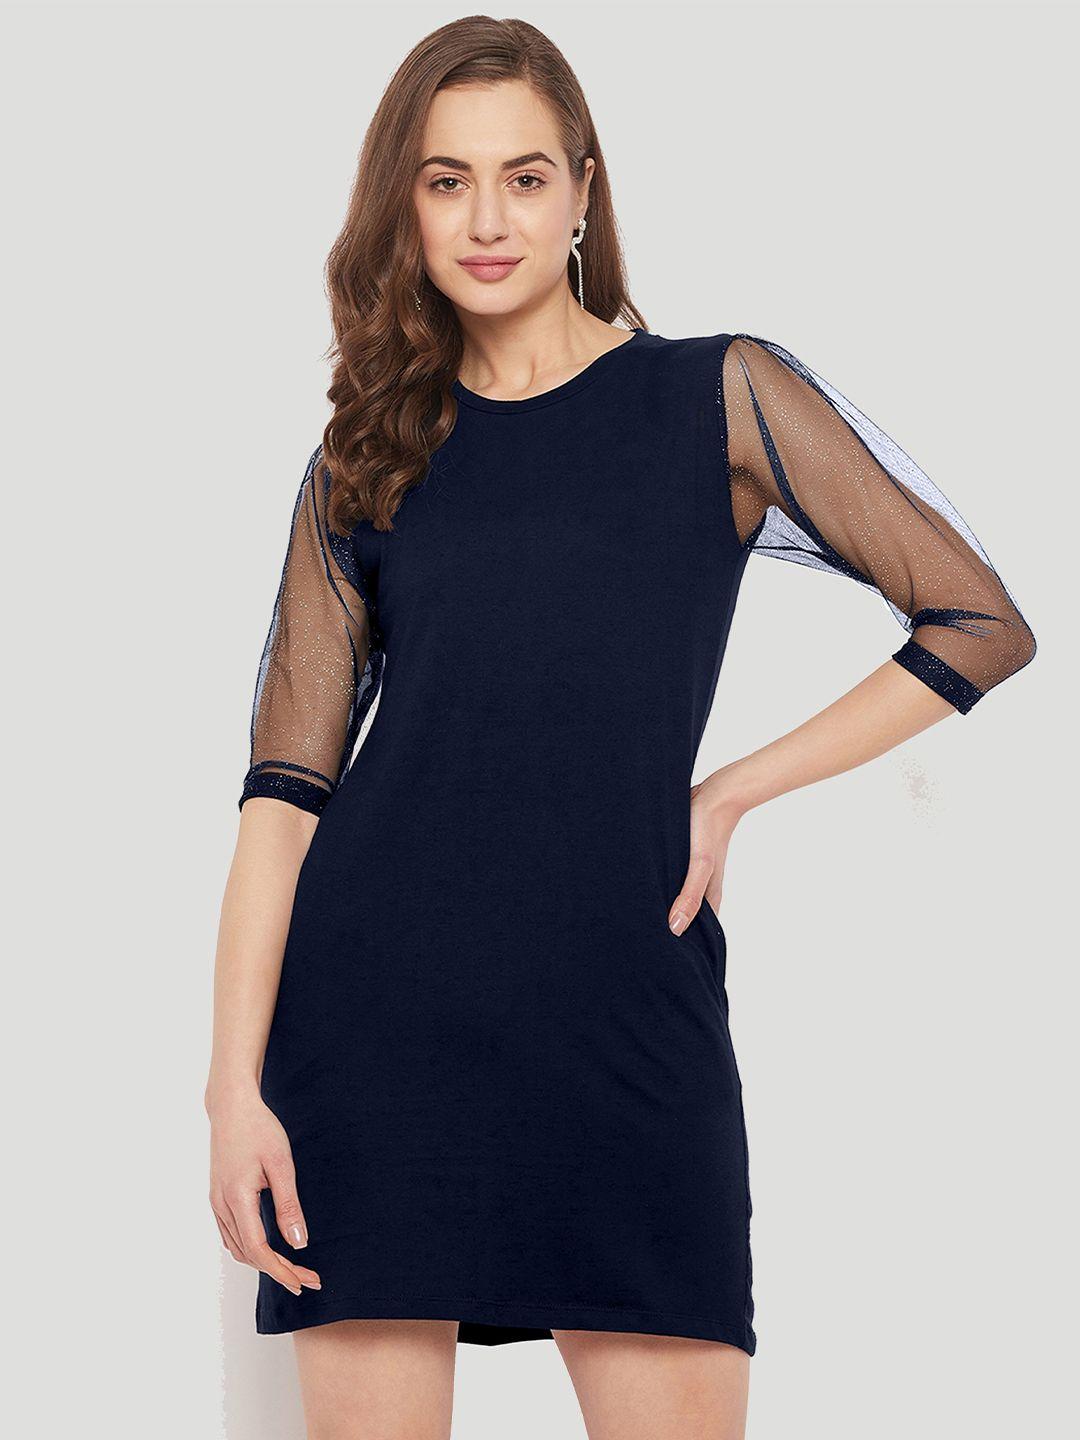 jhankhi blue solid a-line dress with net sleeves